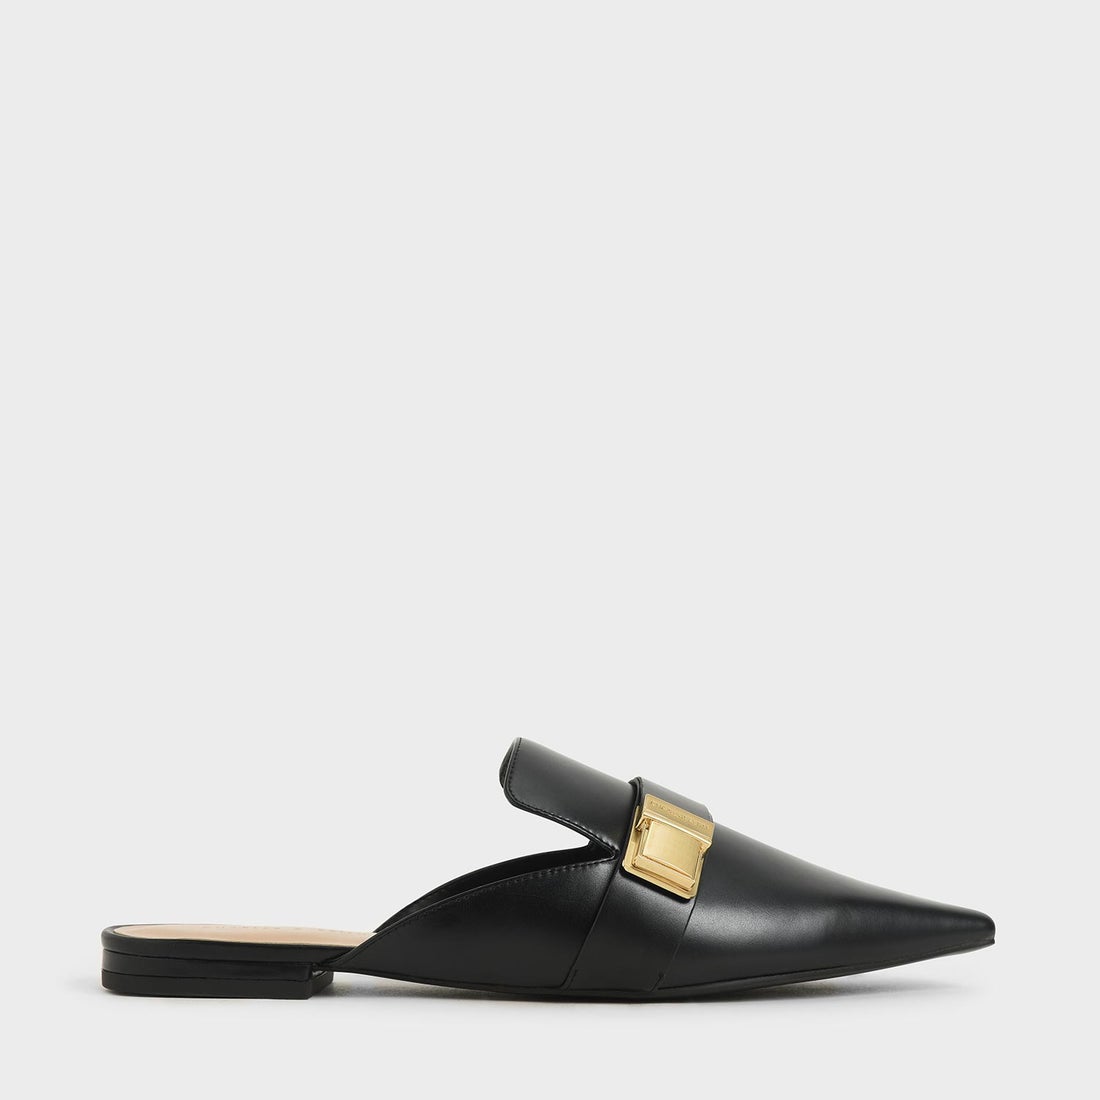 CHARLES & KEITH バックルローファーミュール / Buckle Loafer Mules 